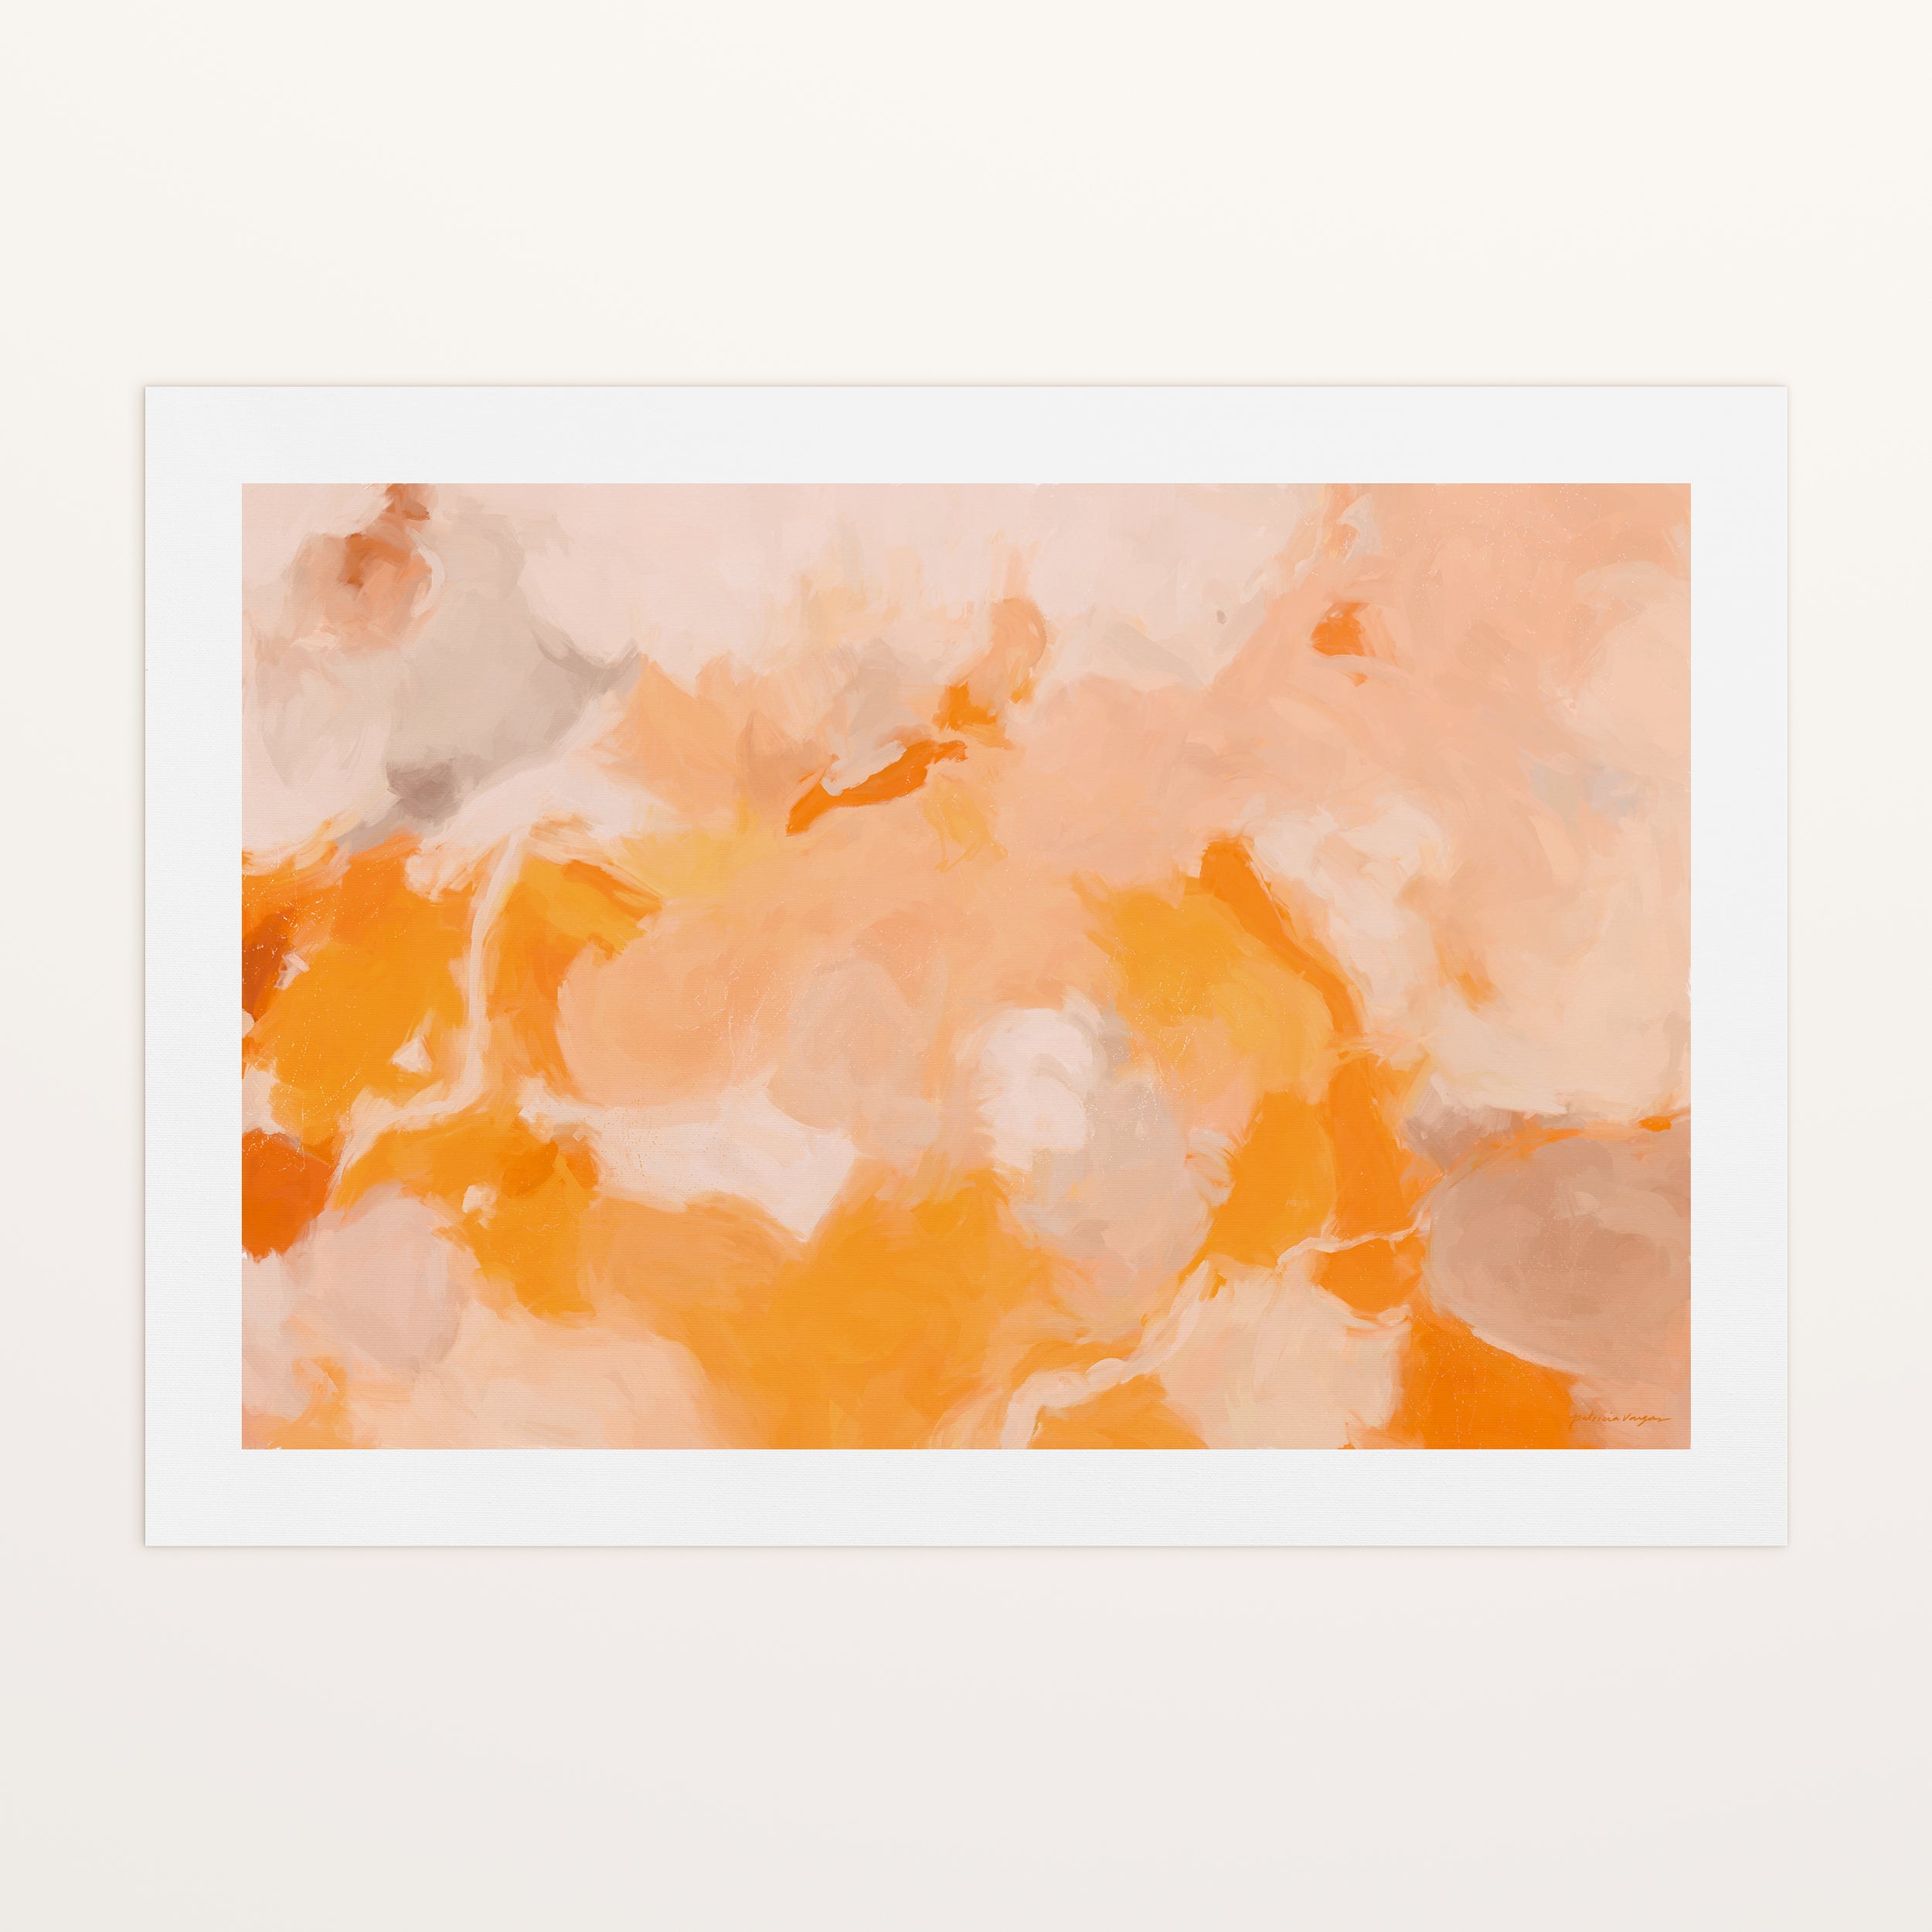 Sweet Orange, orange and pink colorful abstract canvas wall art print by Parima Studio